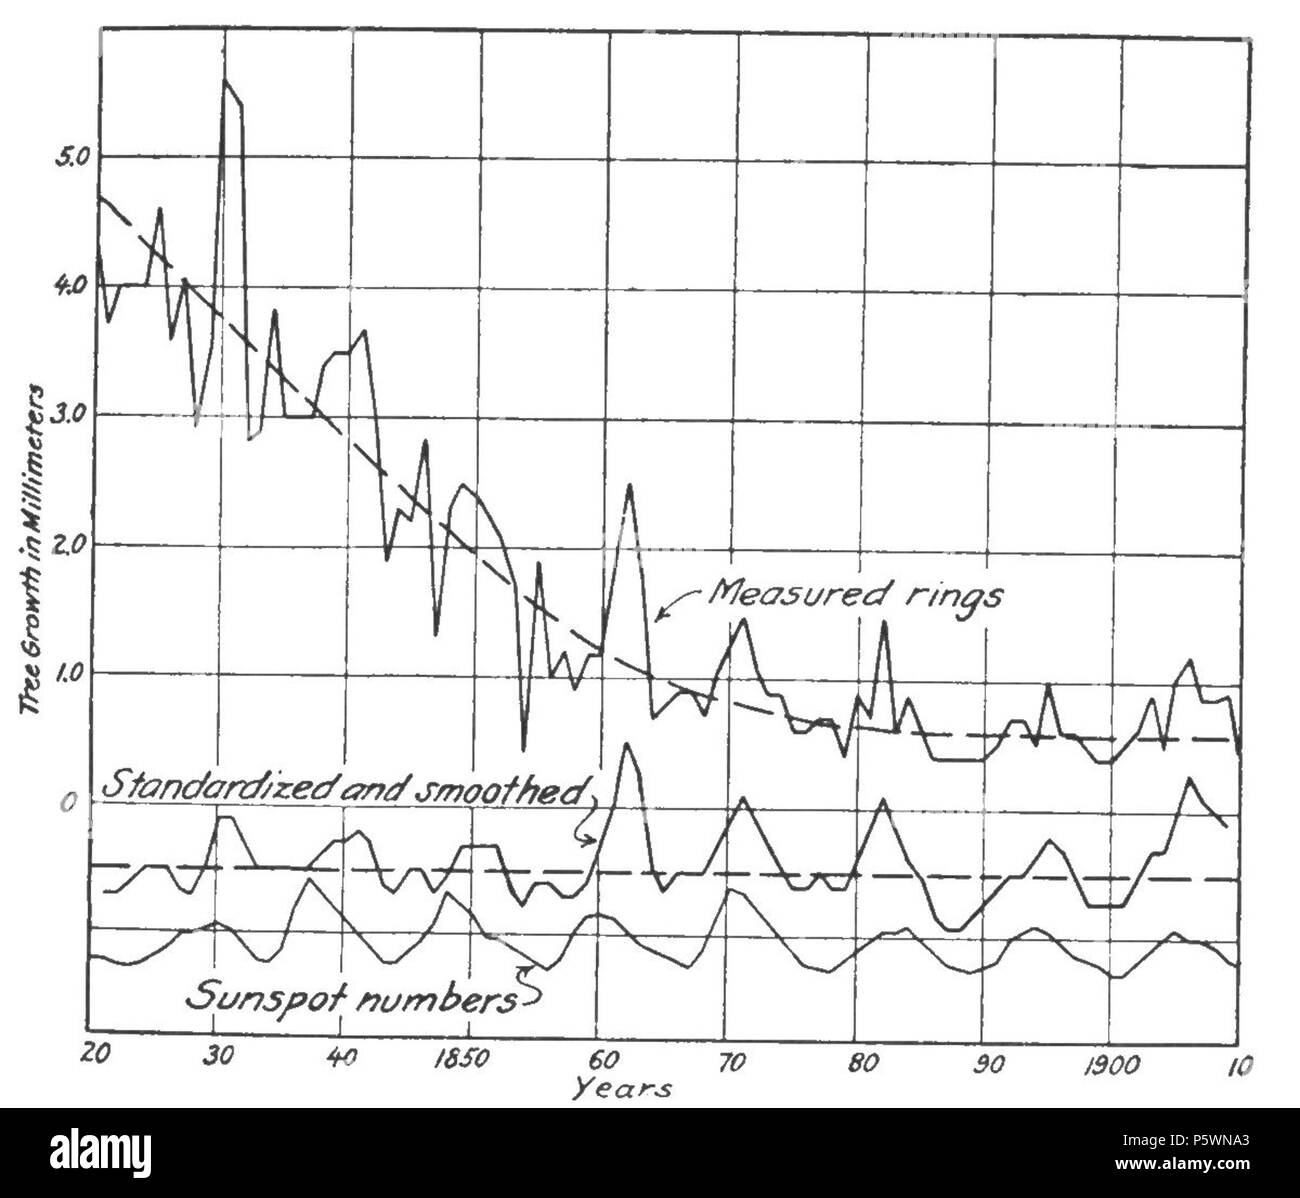 N/A. English: Fig. 22.—Sunspot numbers and annual rings in spruce tree from south Sweden. 1919. Andrew Ellicott Douglass 353 Climatic Cycles and Tree-Growth Fig 22 Stock Photo